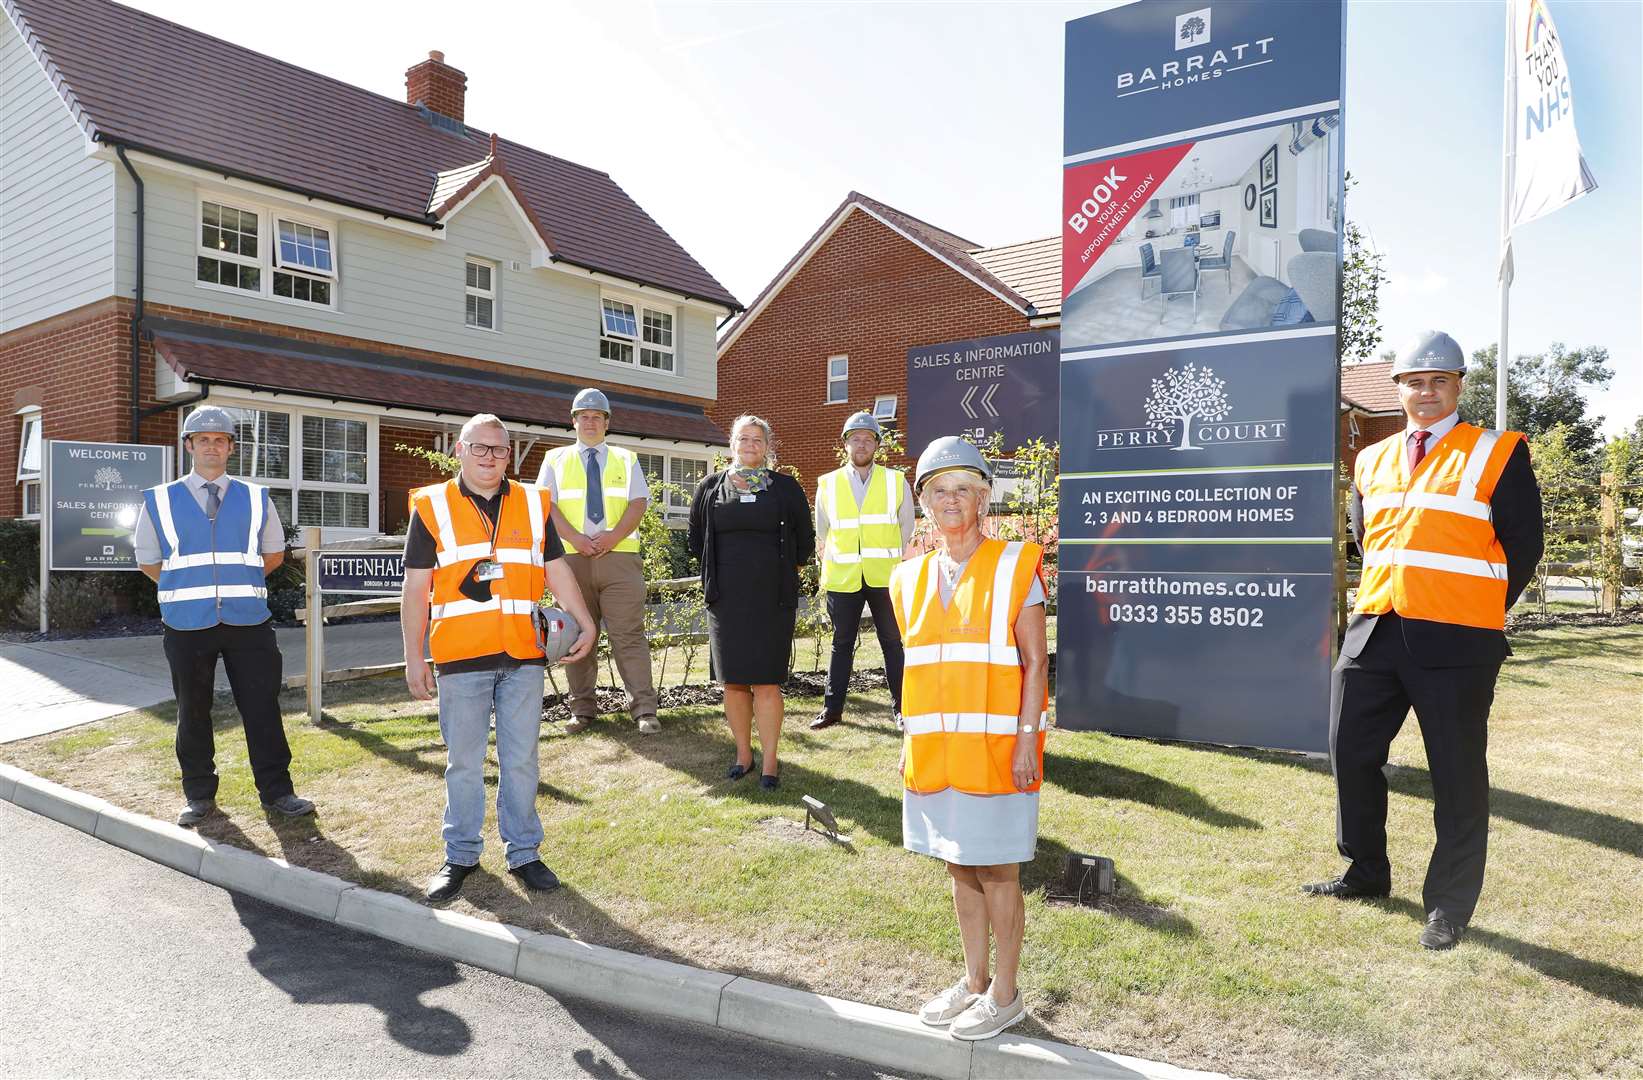 Town councillors had a tour of the Perry Court development last week